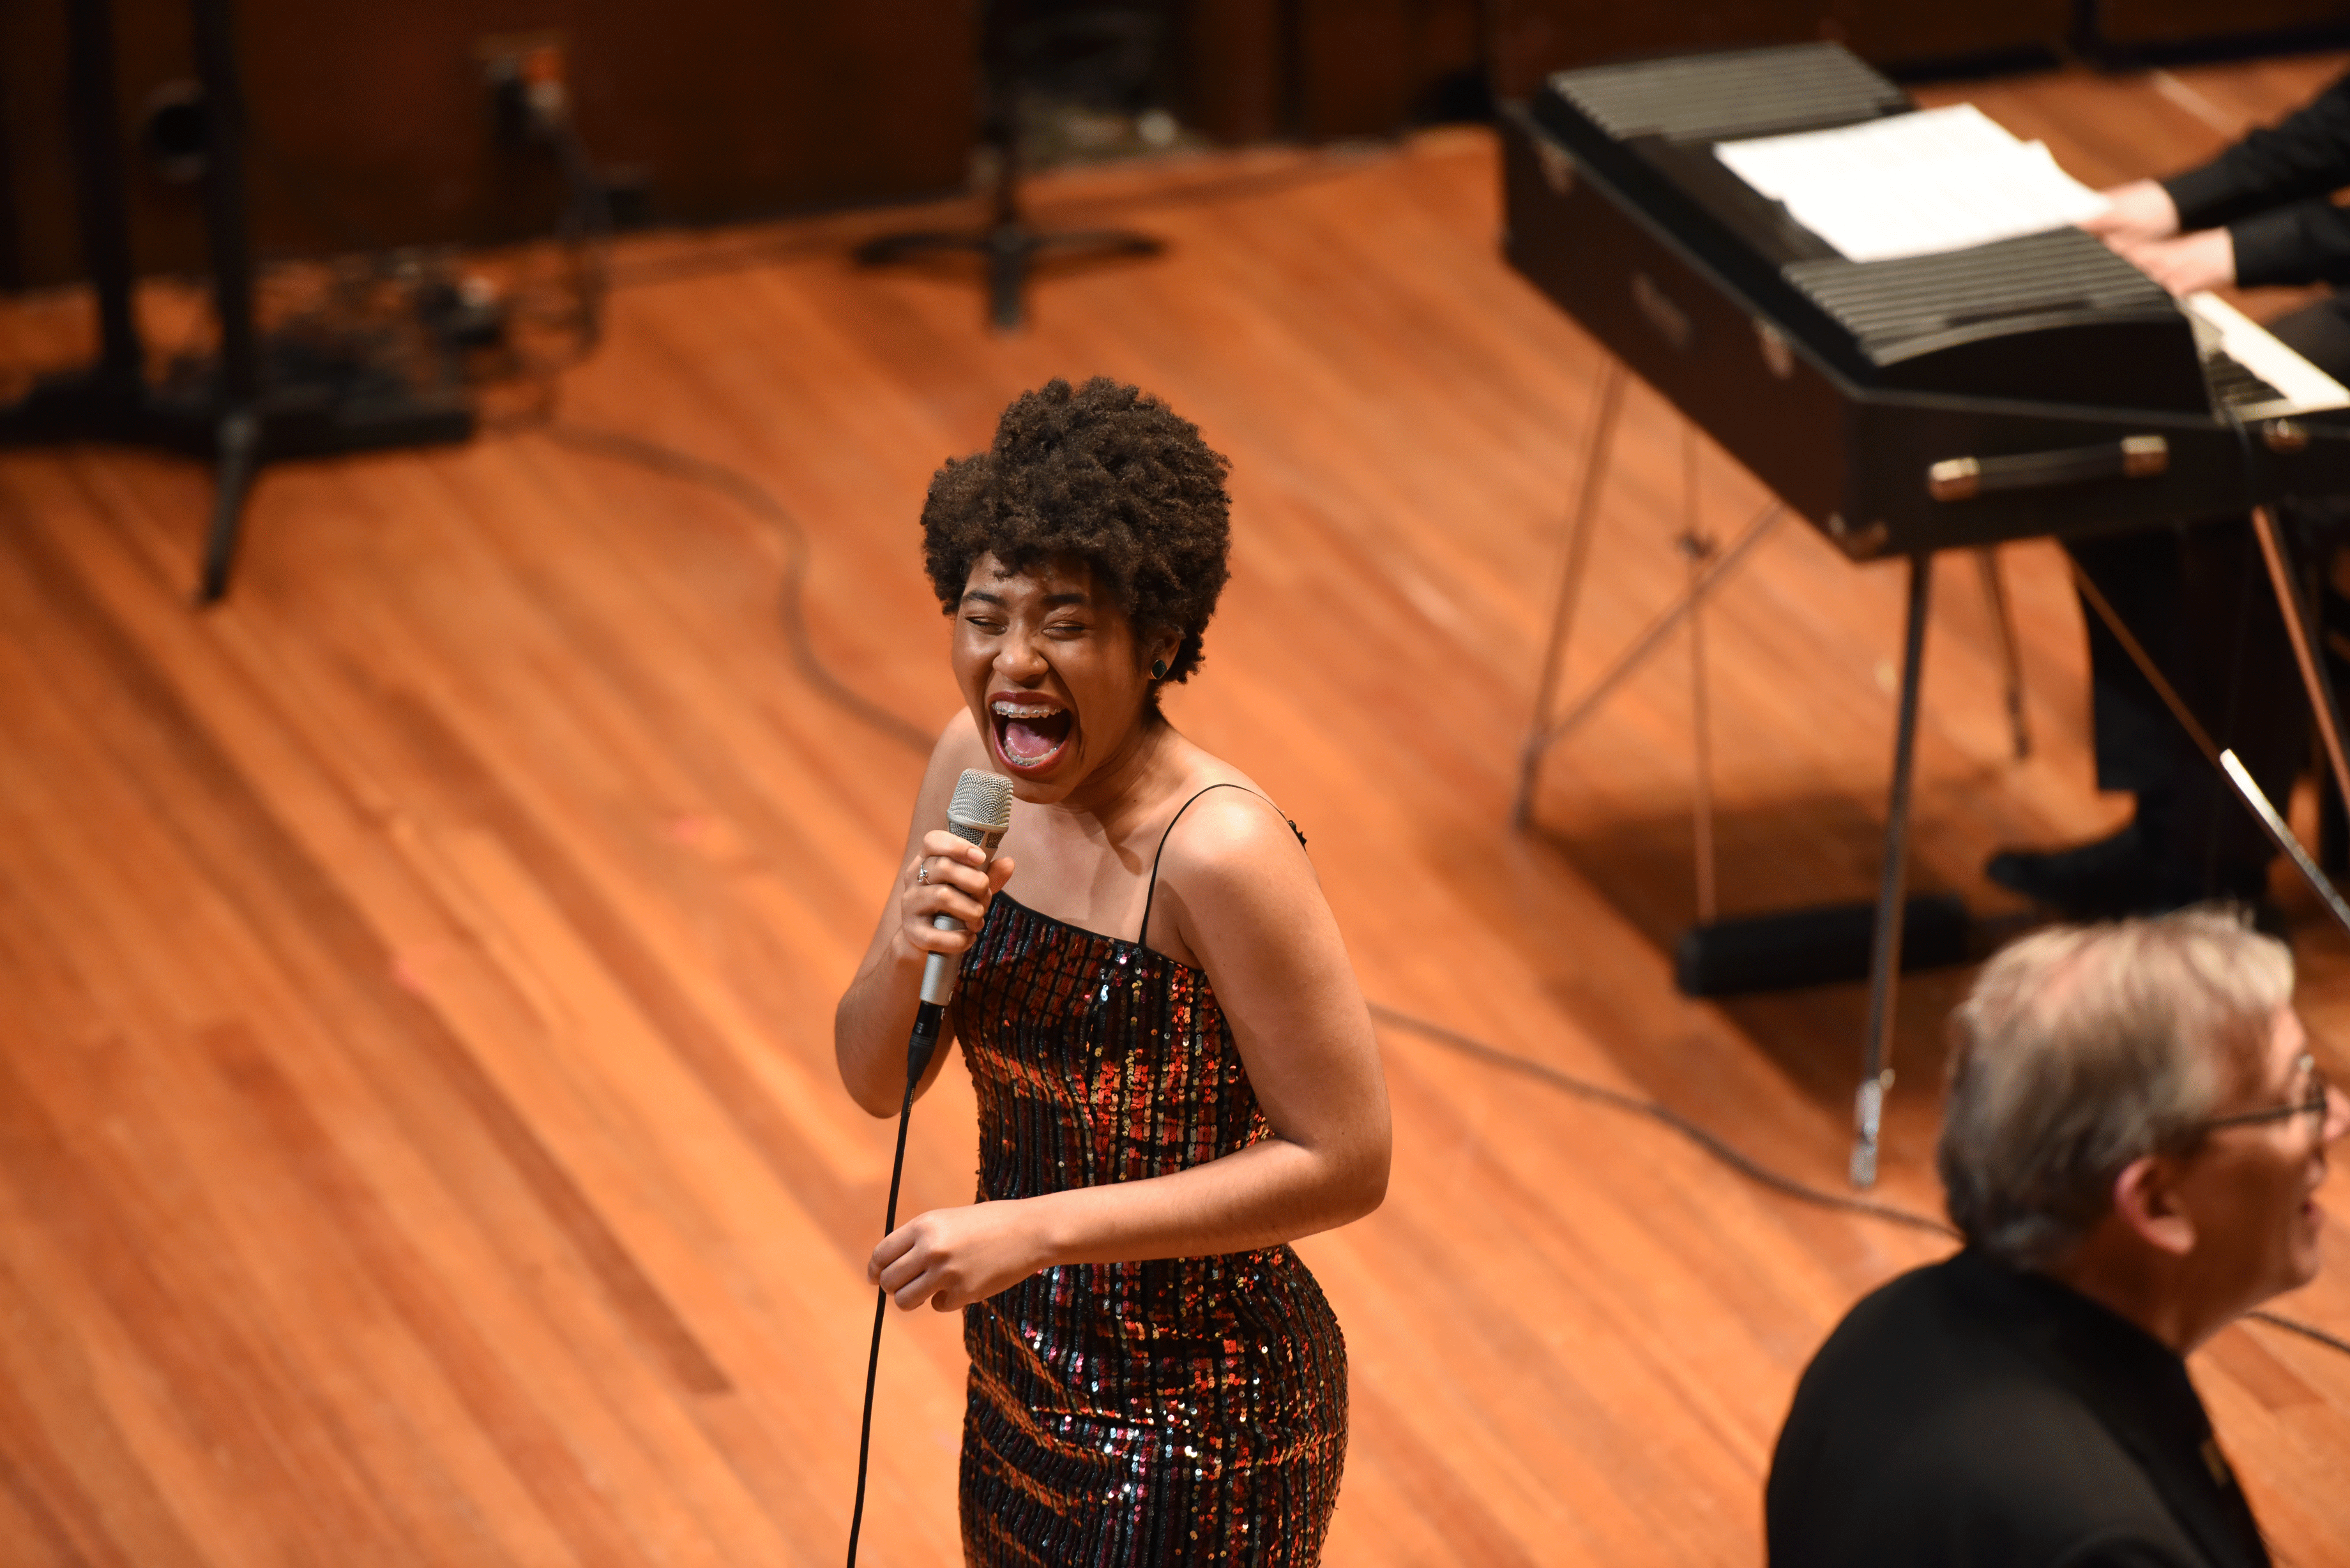 Darynn Dean sings with NEC Jazz Orchestra during The Music of Ran Blake concert